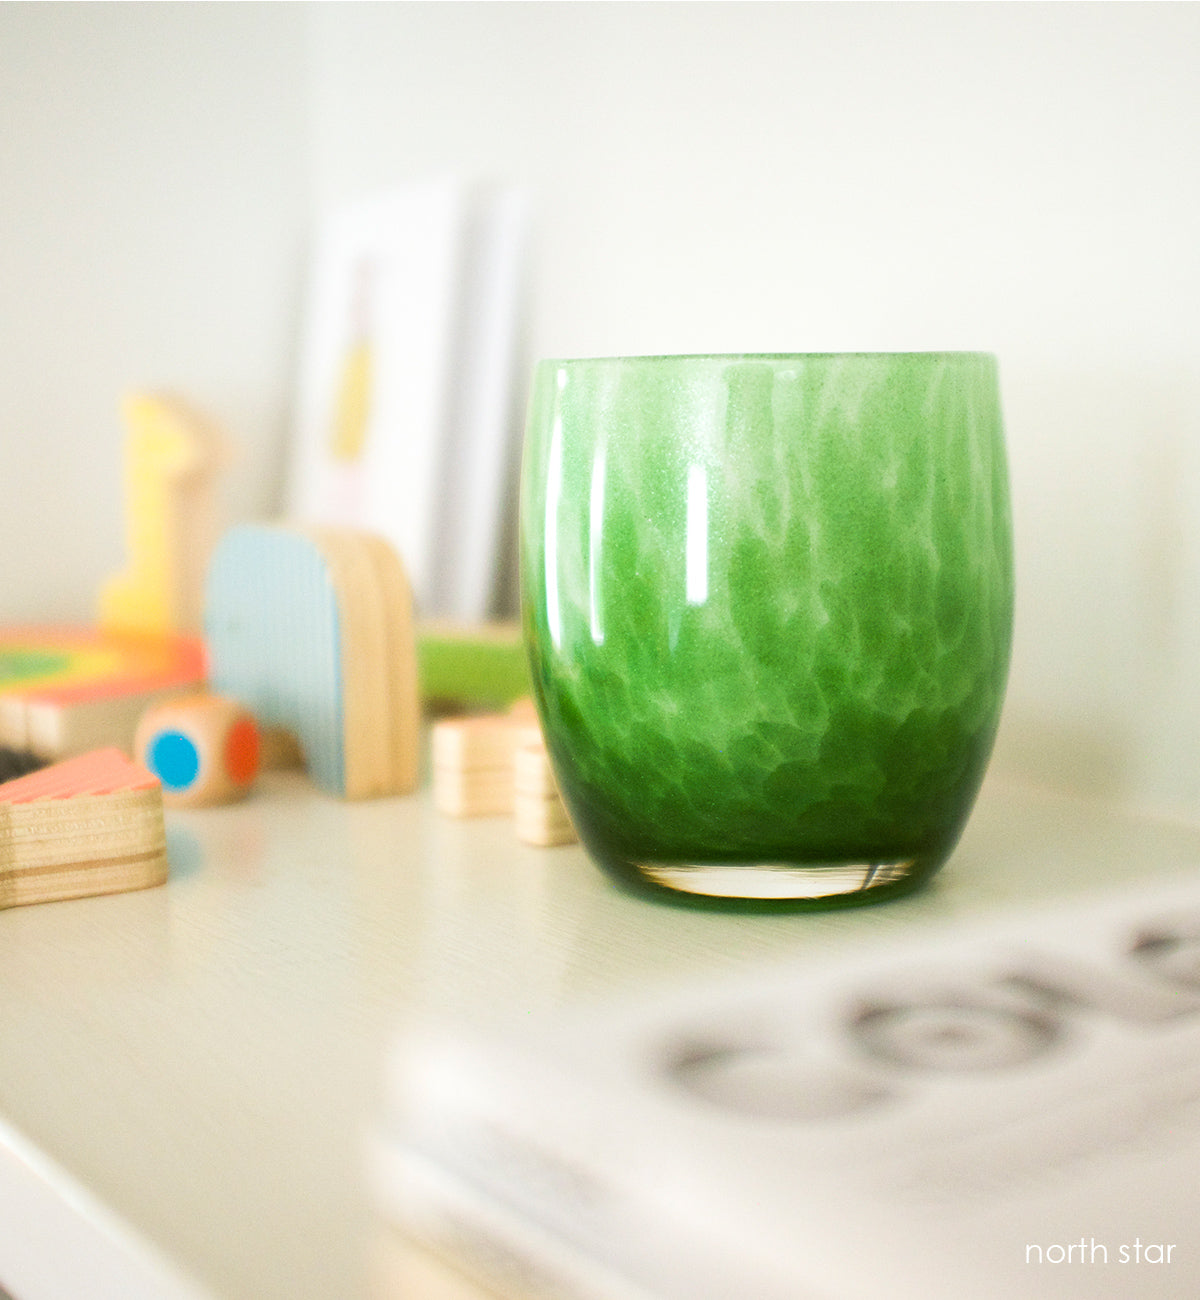 northstar, green with glitter hand-blown glass votive candle holder